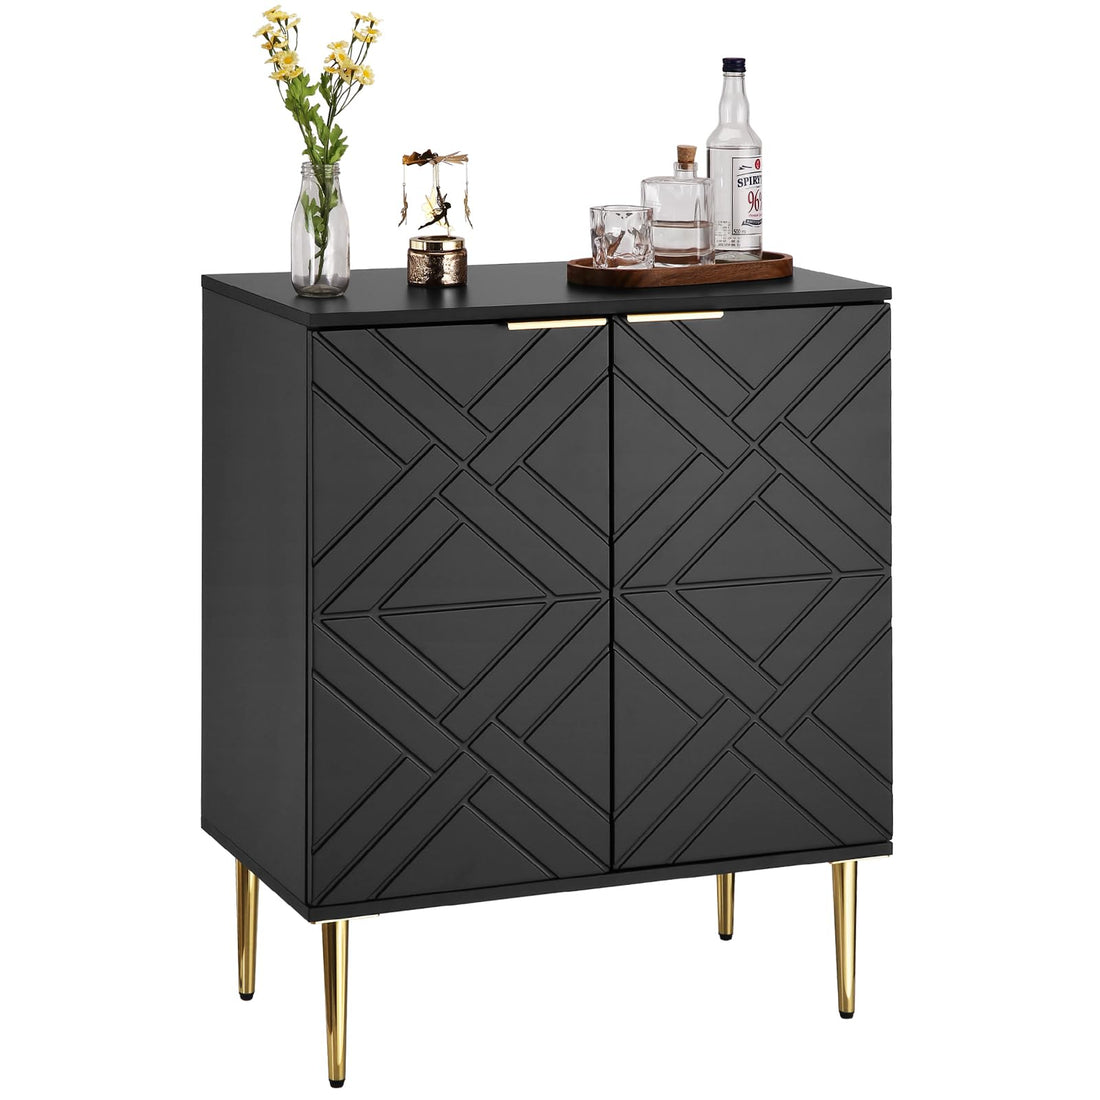 Storage Cabinet with Doors, Modern Black Accent Cabinet, Sideboard Buffet Cabinet for Dining Room, Living Room, Kitchen